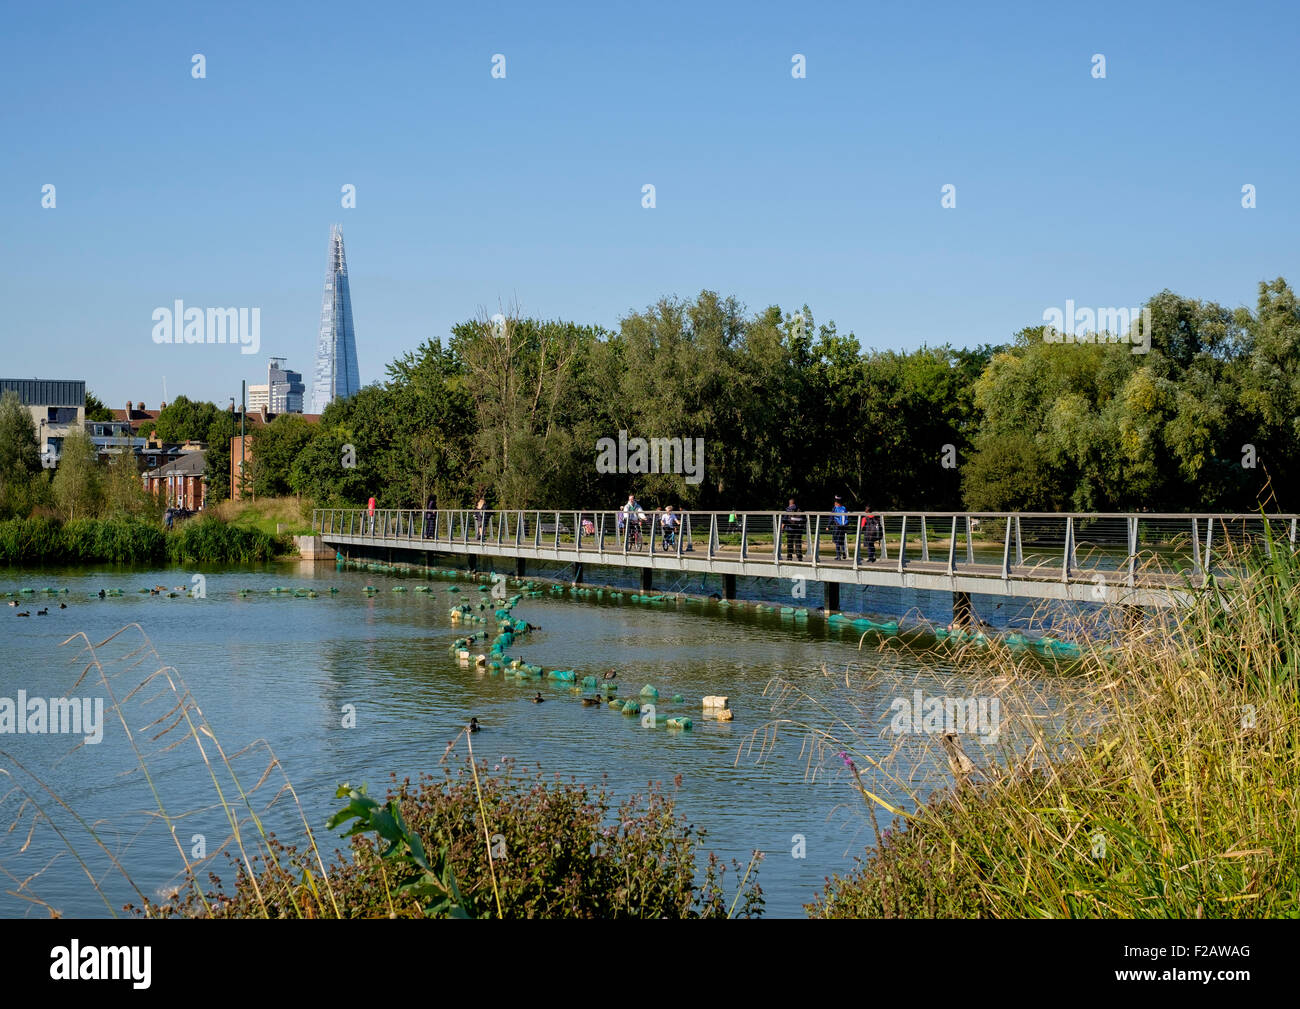 10 September 2015: Walworth, South London: The lake, Burgess Park boardwalk with The Shard and the city of London Stock Photo